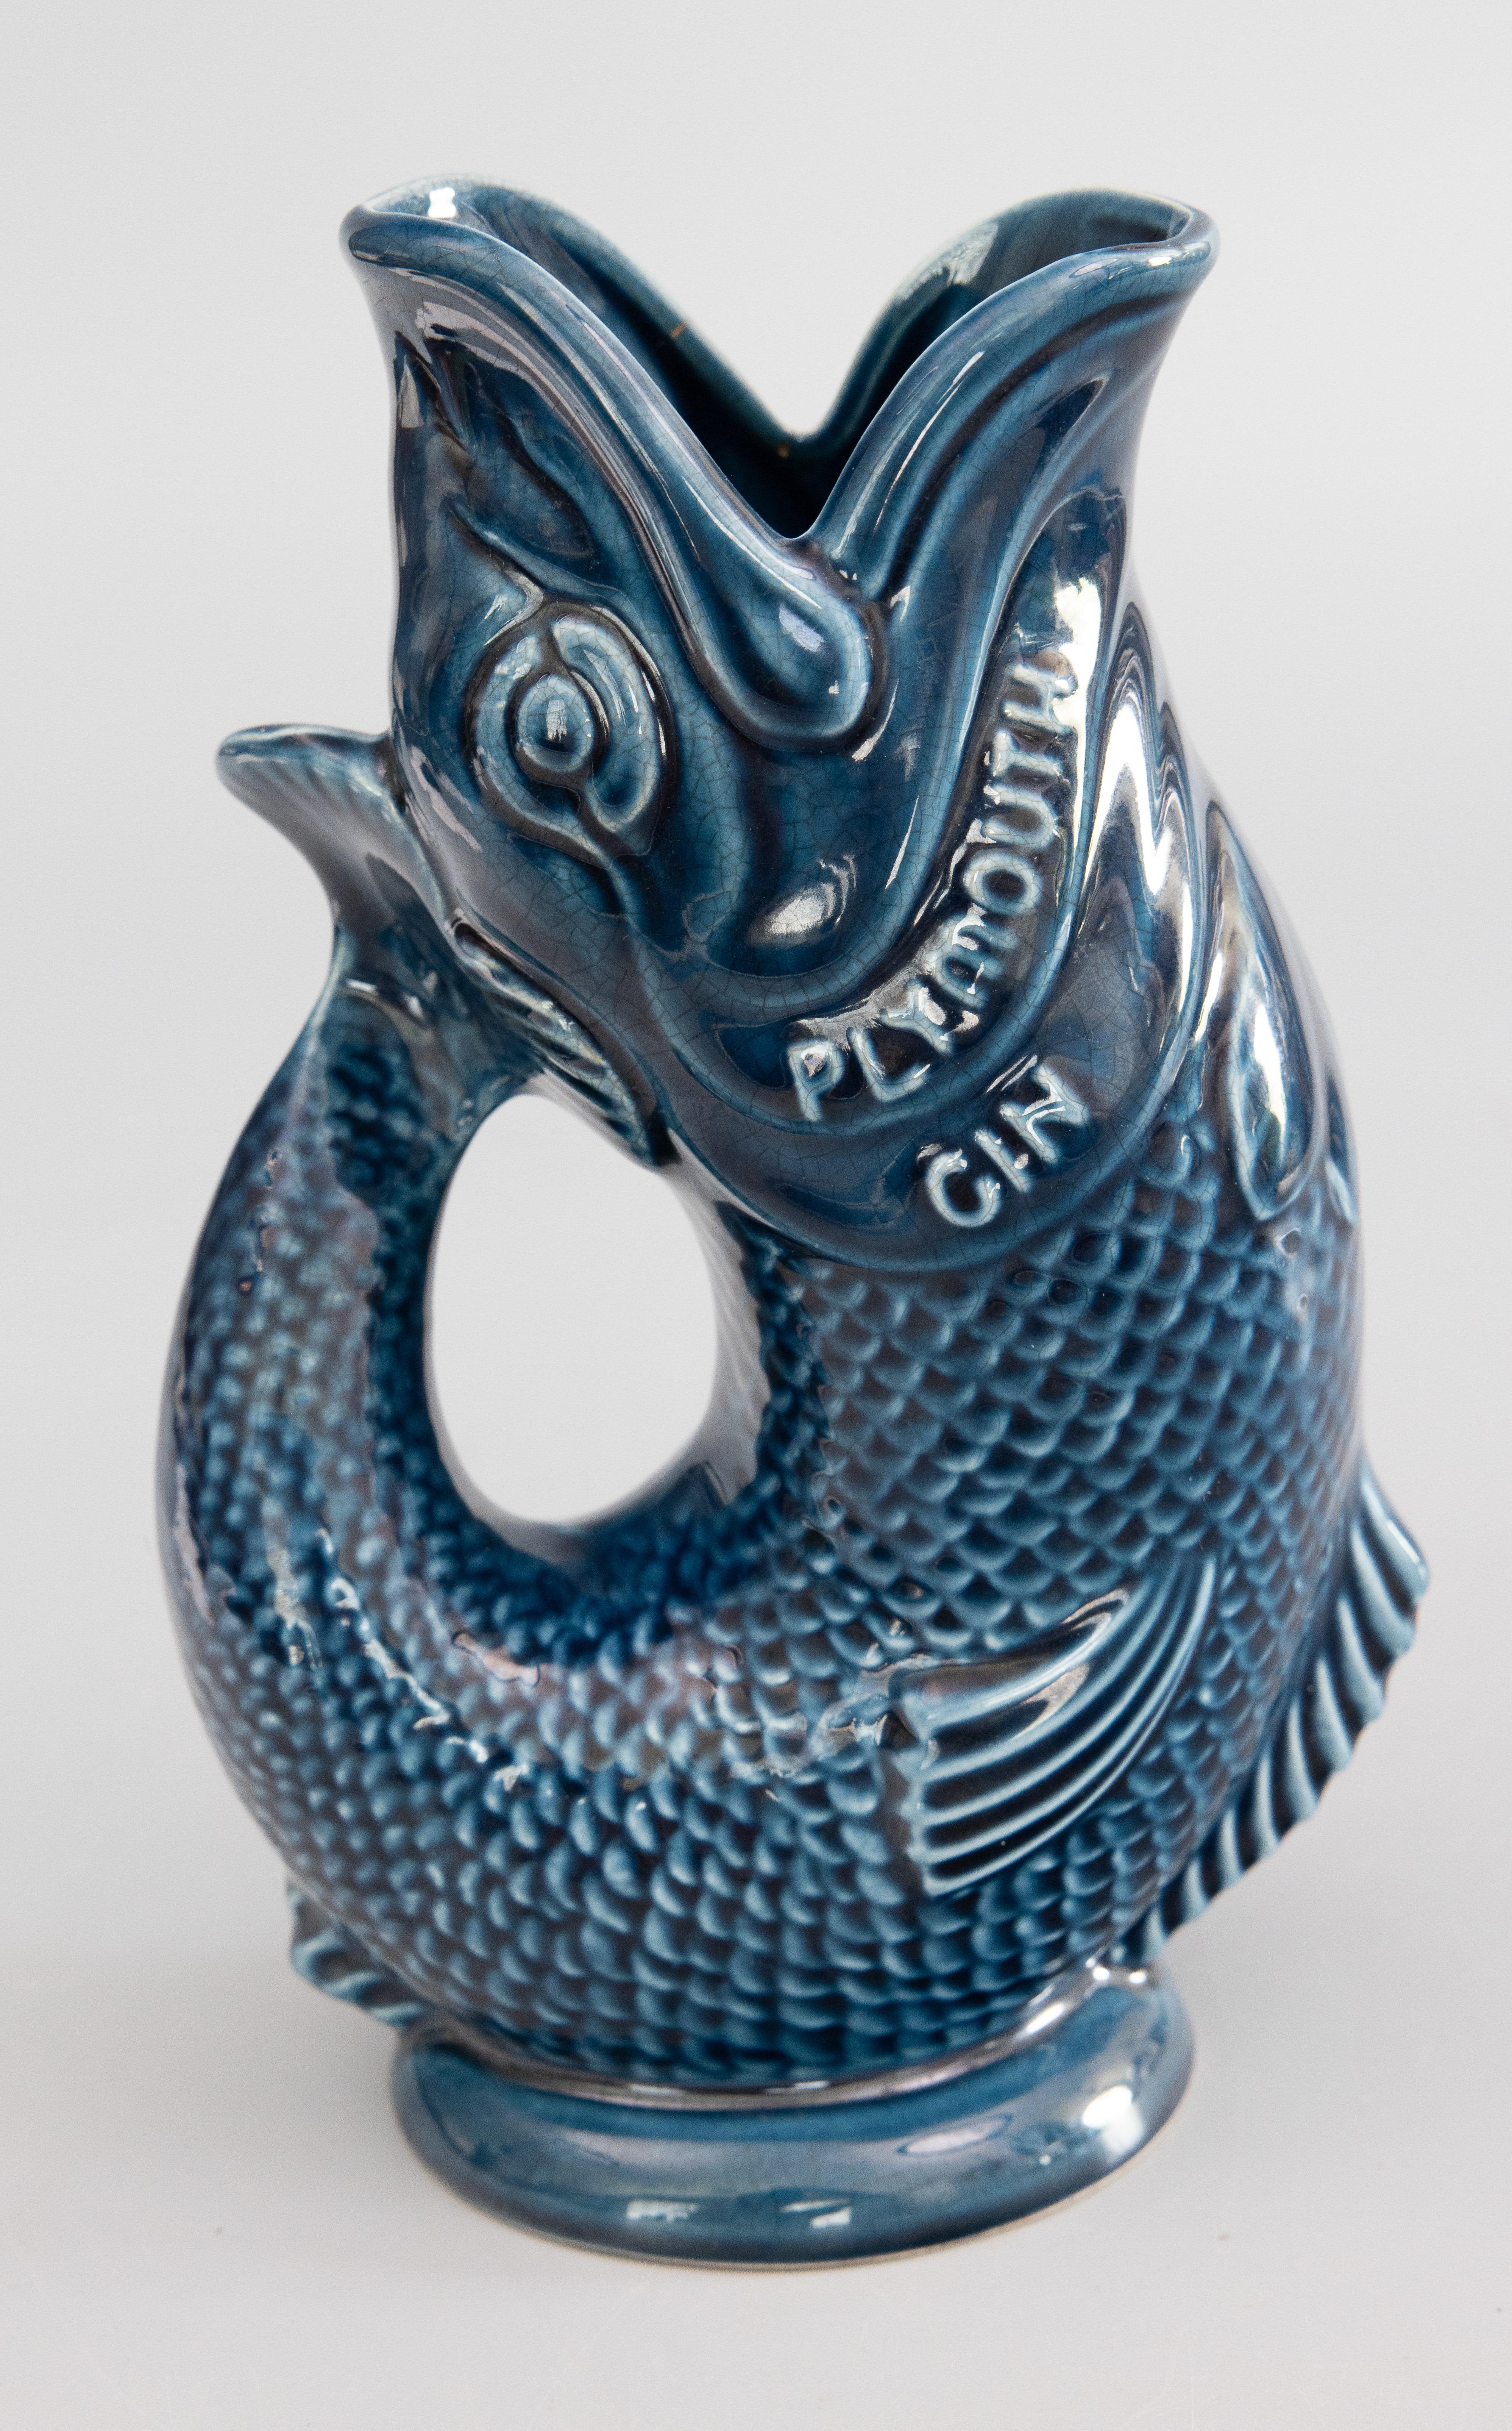 A fabulous vintage English blue gurgling fish glazed ceramic pitcher or glug jug by Dartmouth pottery, made in Devon, England, circa 1960. Maker's mark on reverse. This stylish pitcher is a lovely glazed blue color advertising 